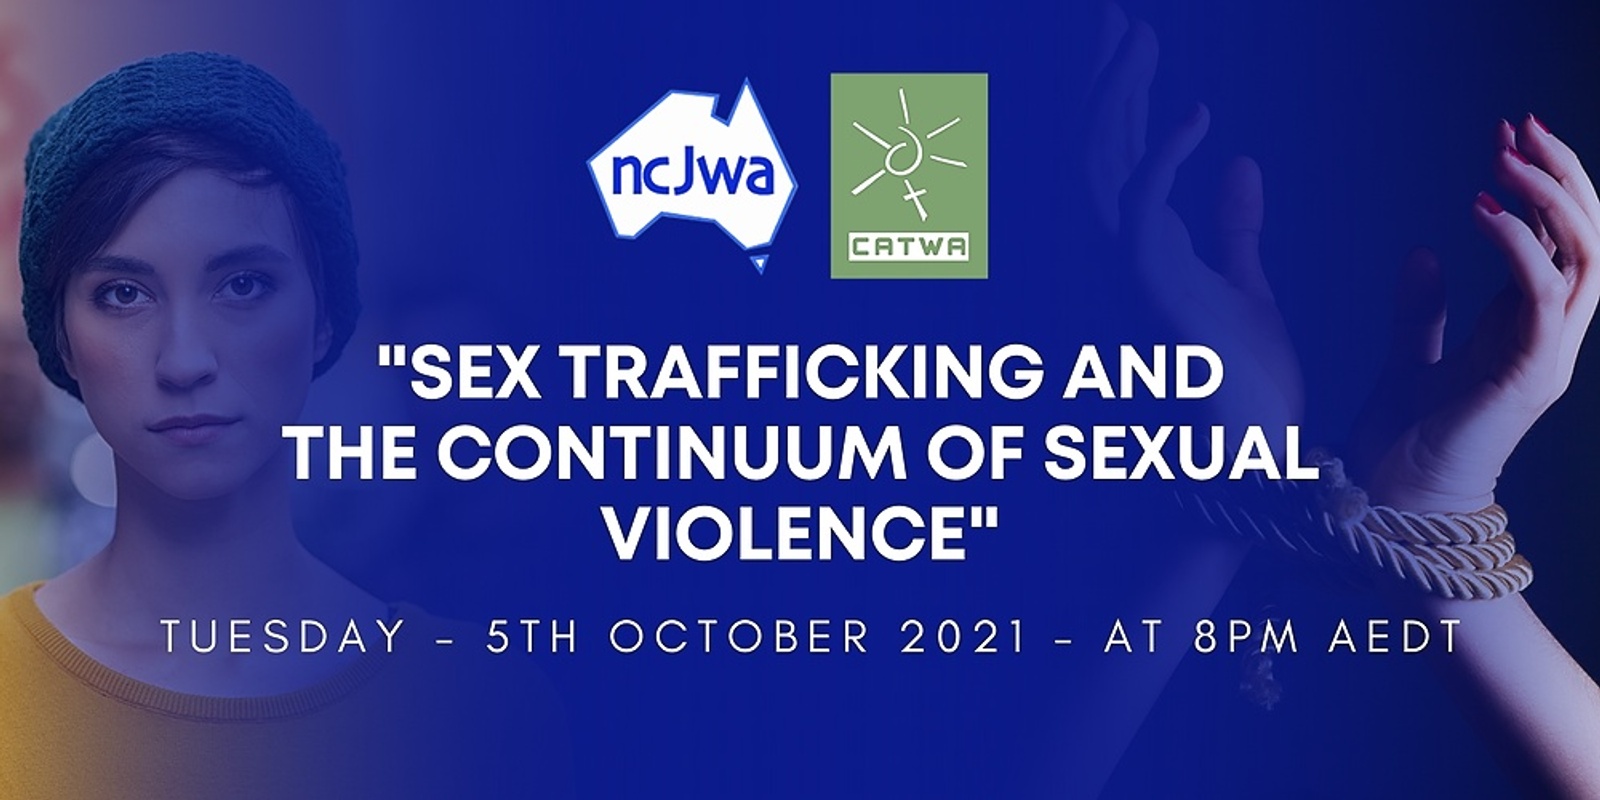 Banner image for NCJWA & CATWA - "Sex Trafficking and the Continuum of Sexual Violence" 